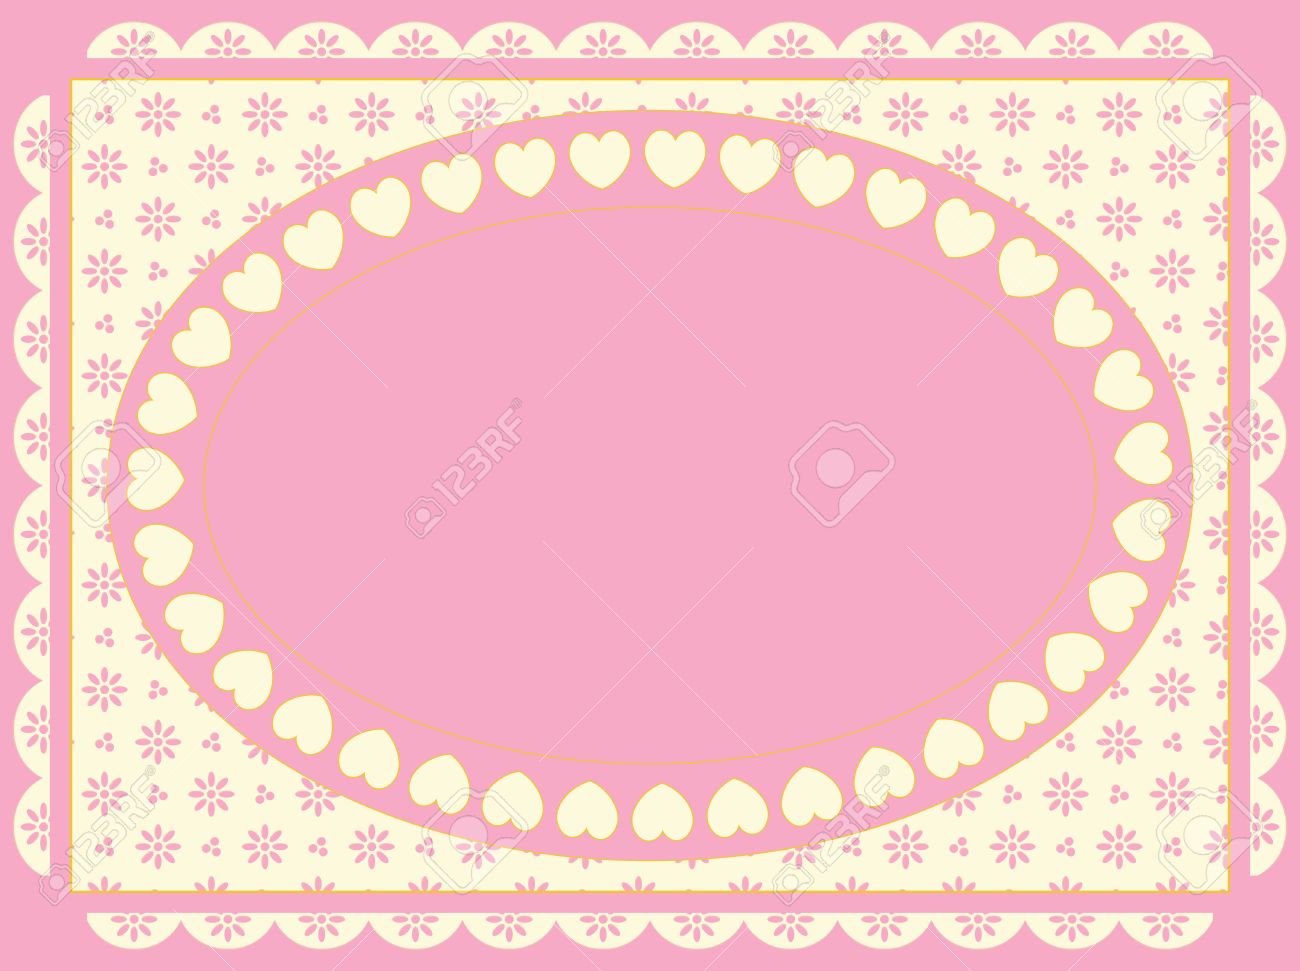 Oval Frame Of Hearts On A Victorian Eyelet Background In Shades